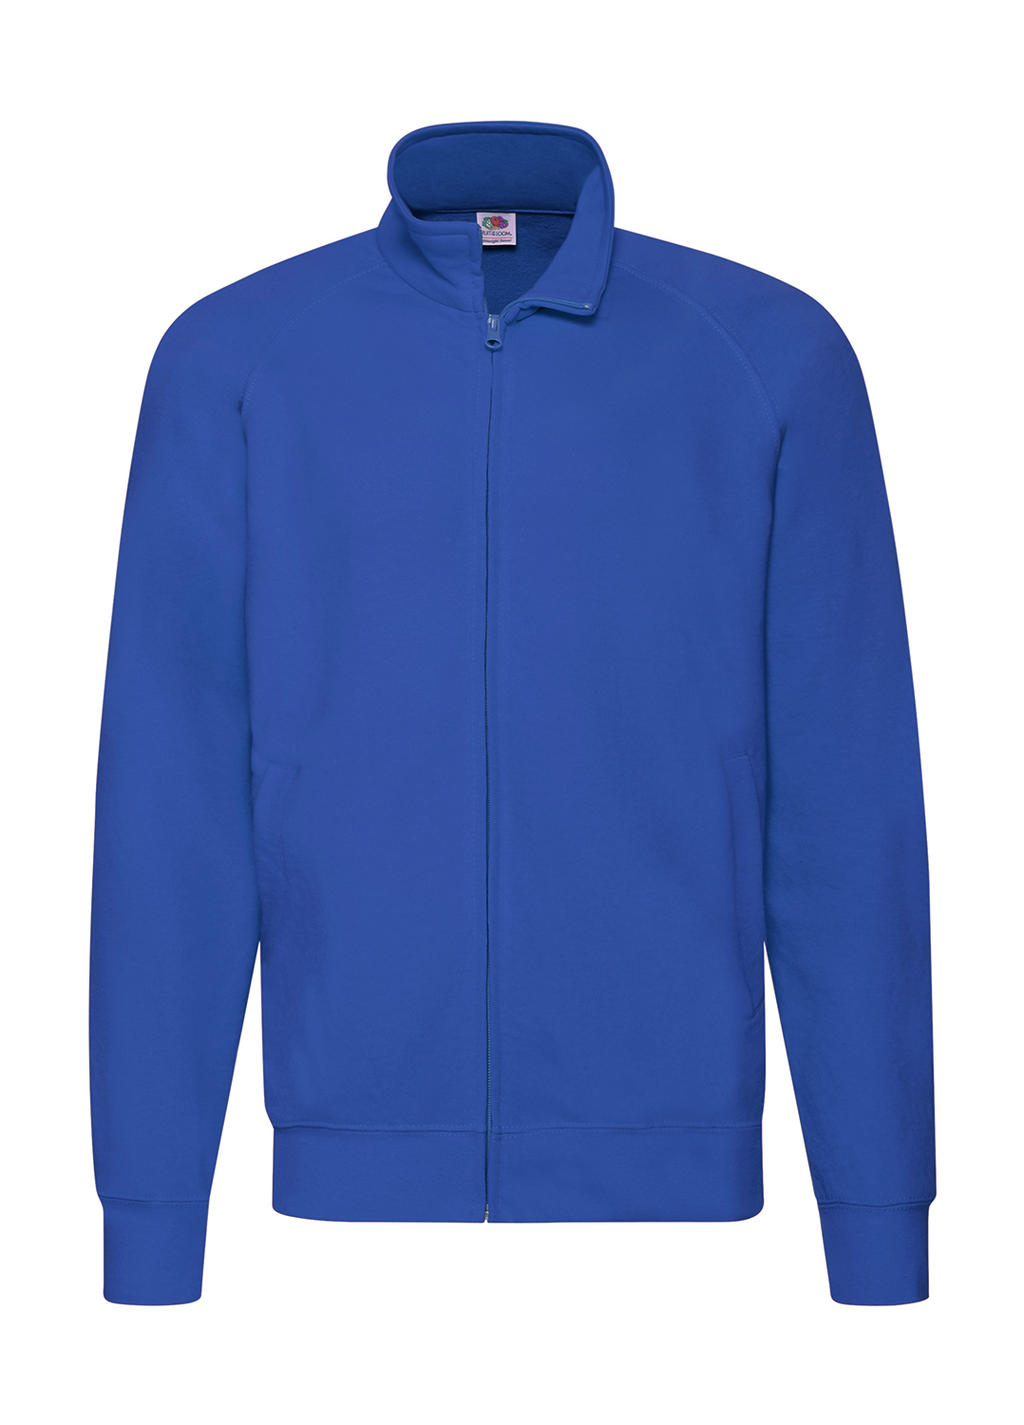  Lightweight Sweat Jacket in Farbe Royal